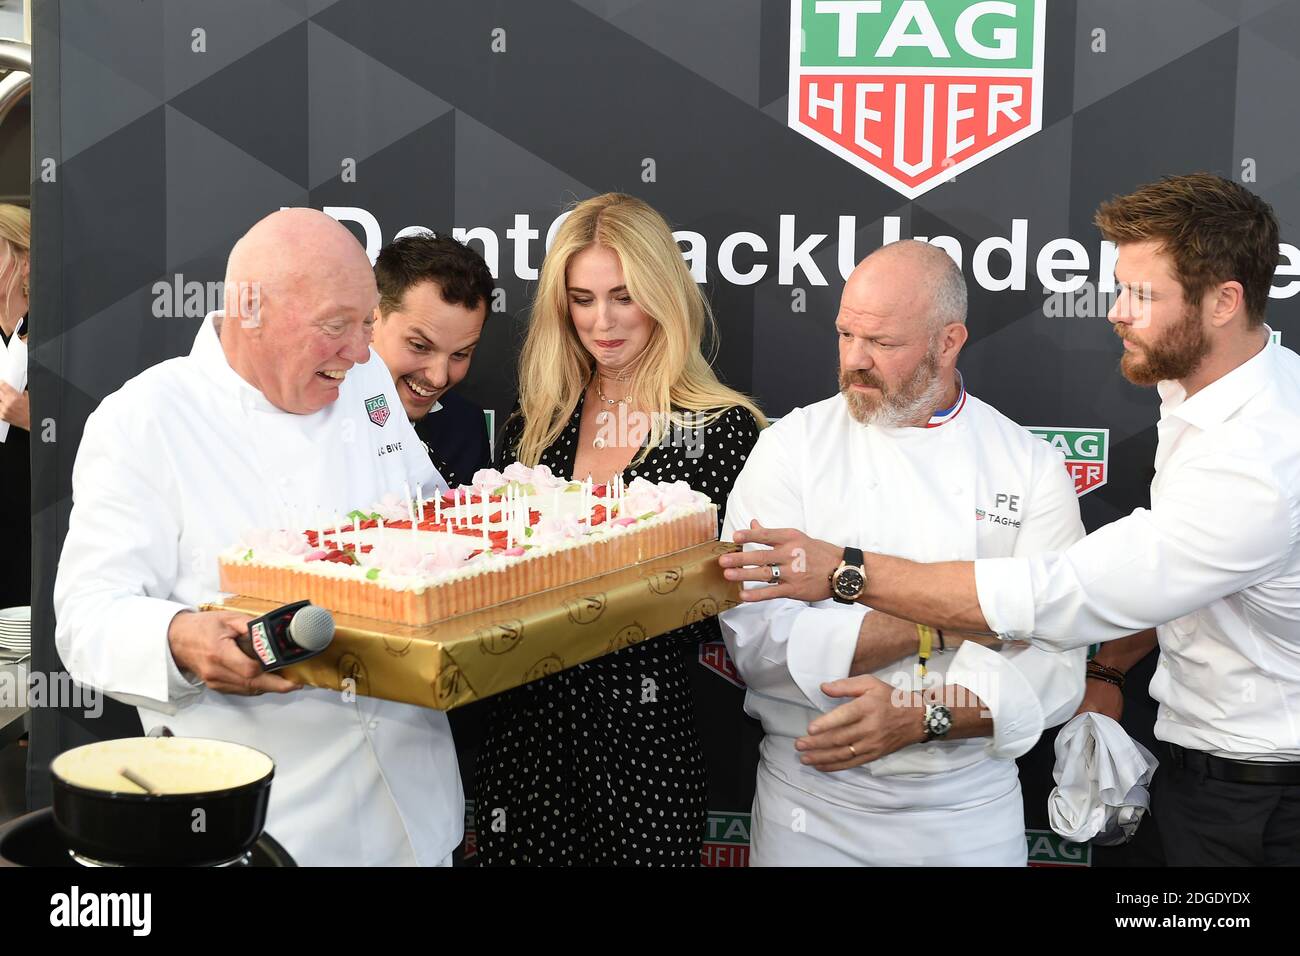 Jean Luc Biver, Chiara Ferragni, Philippe Etchebest, Chris Hemsworth  attending the Tag-Heuer Under Pressure Award event as part of the 75th  Monaco F1 Grand Prix, Monaco on May 27, 2017. Photo by